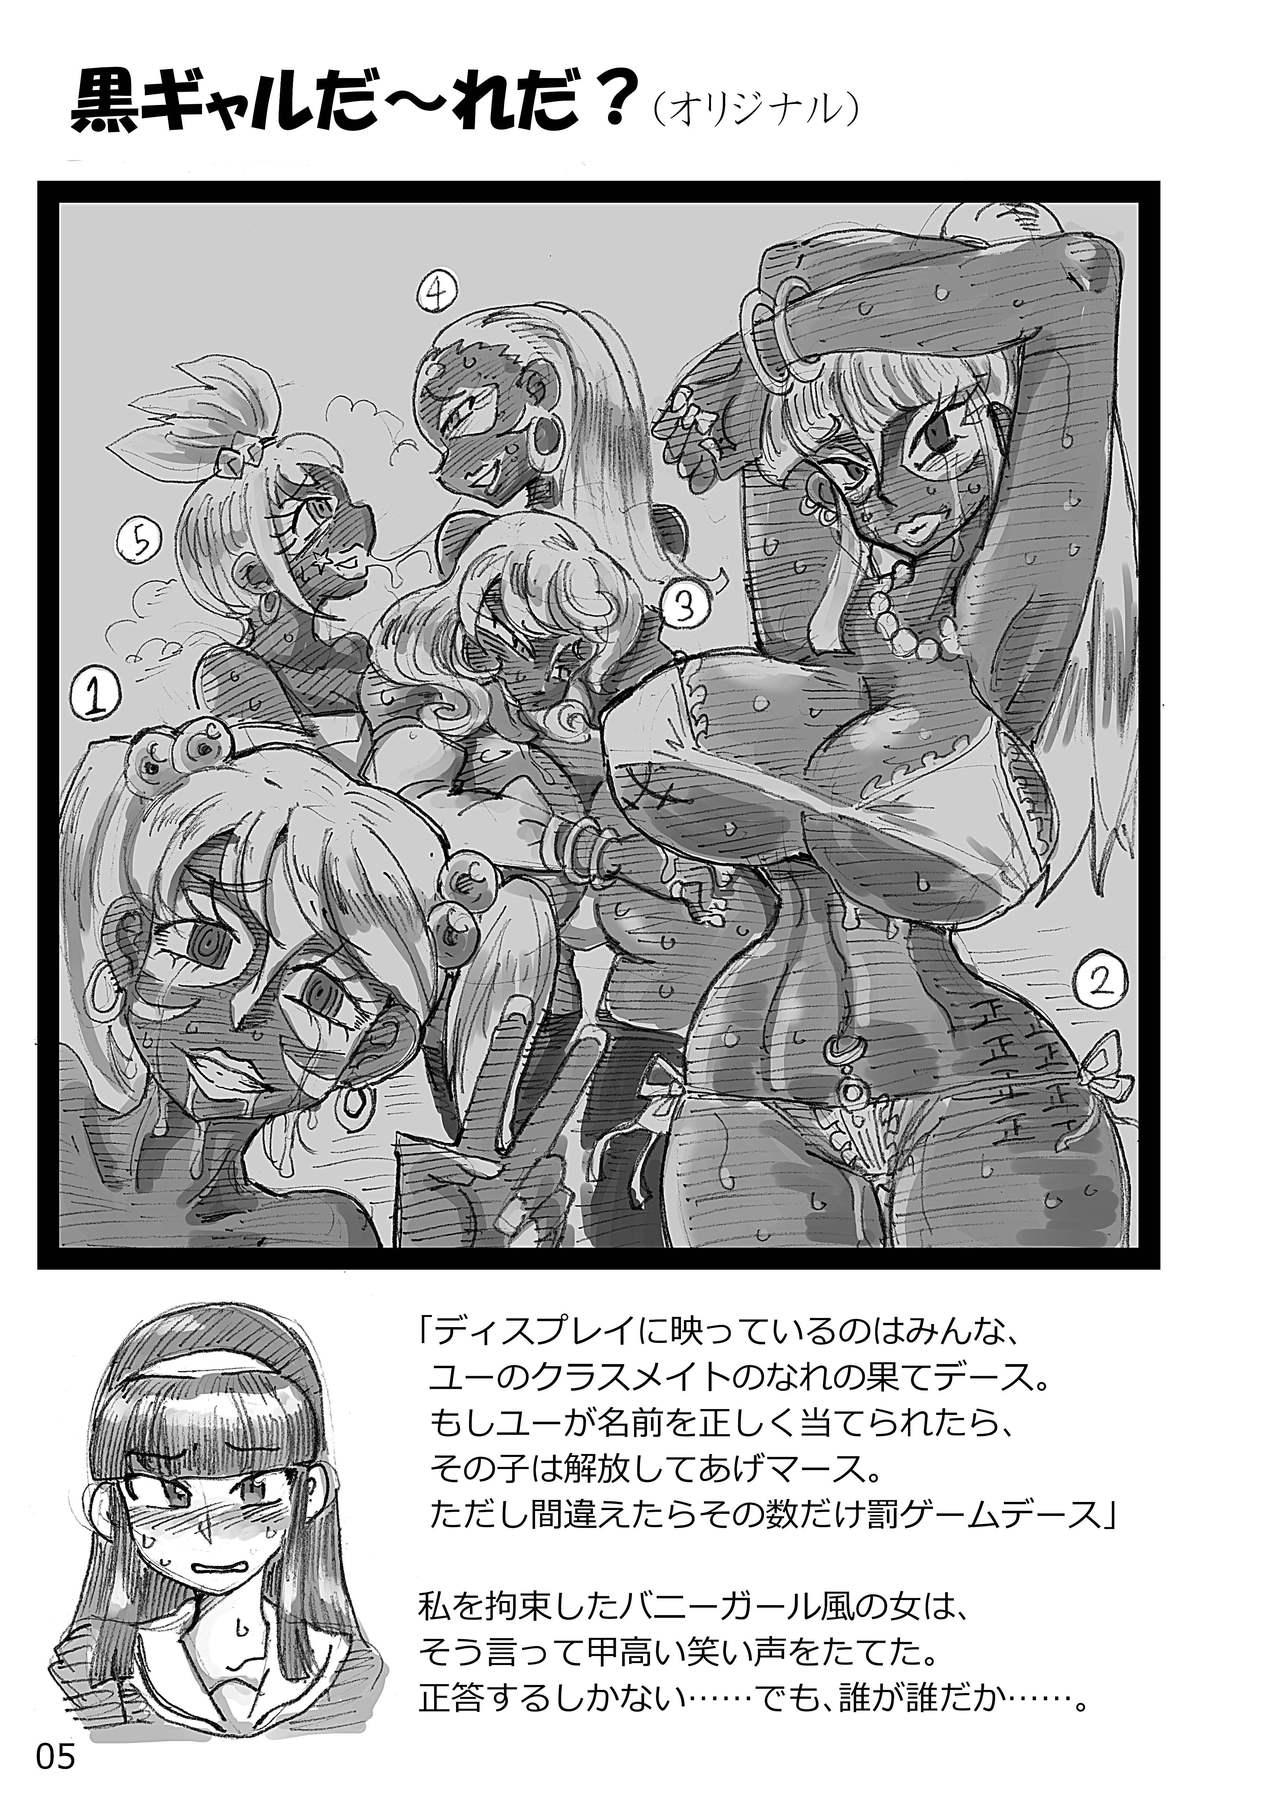 Perrito Short Situations - Kantai collection Girls und panzer Small - Page 5